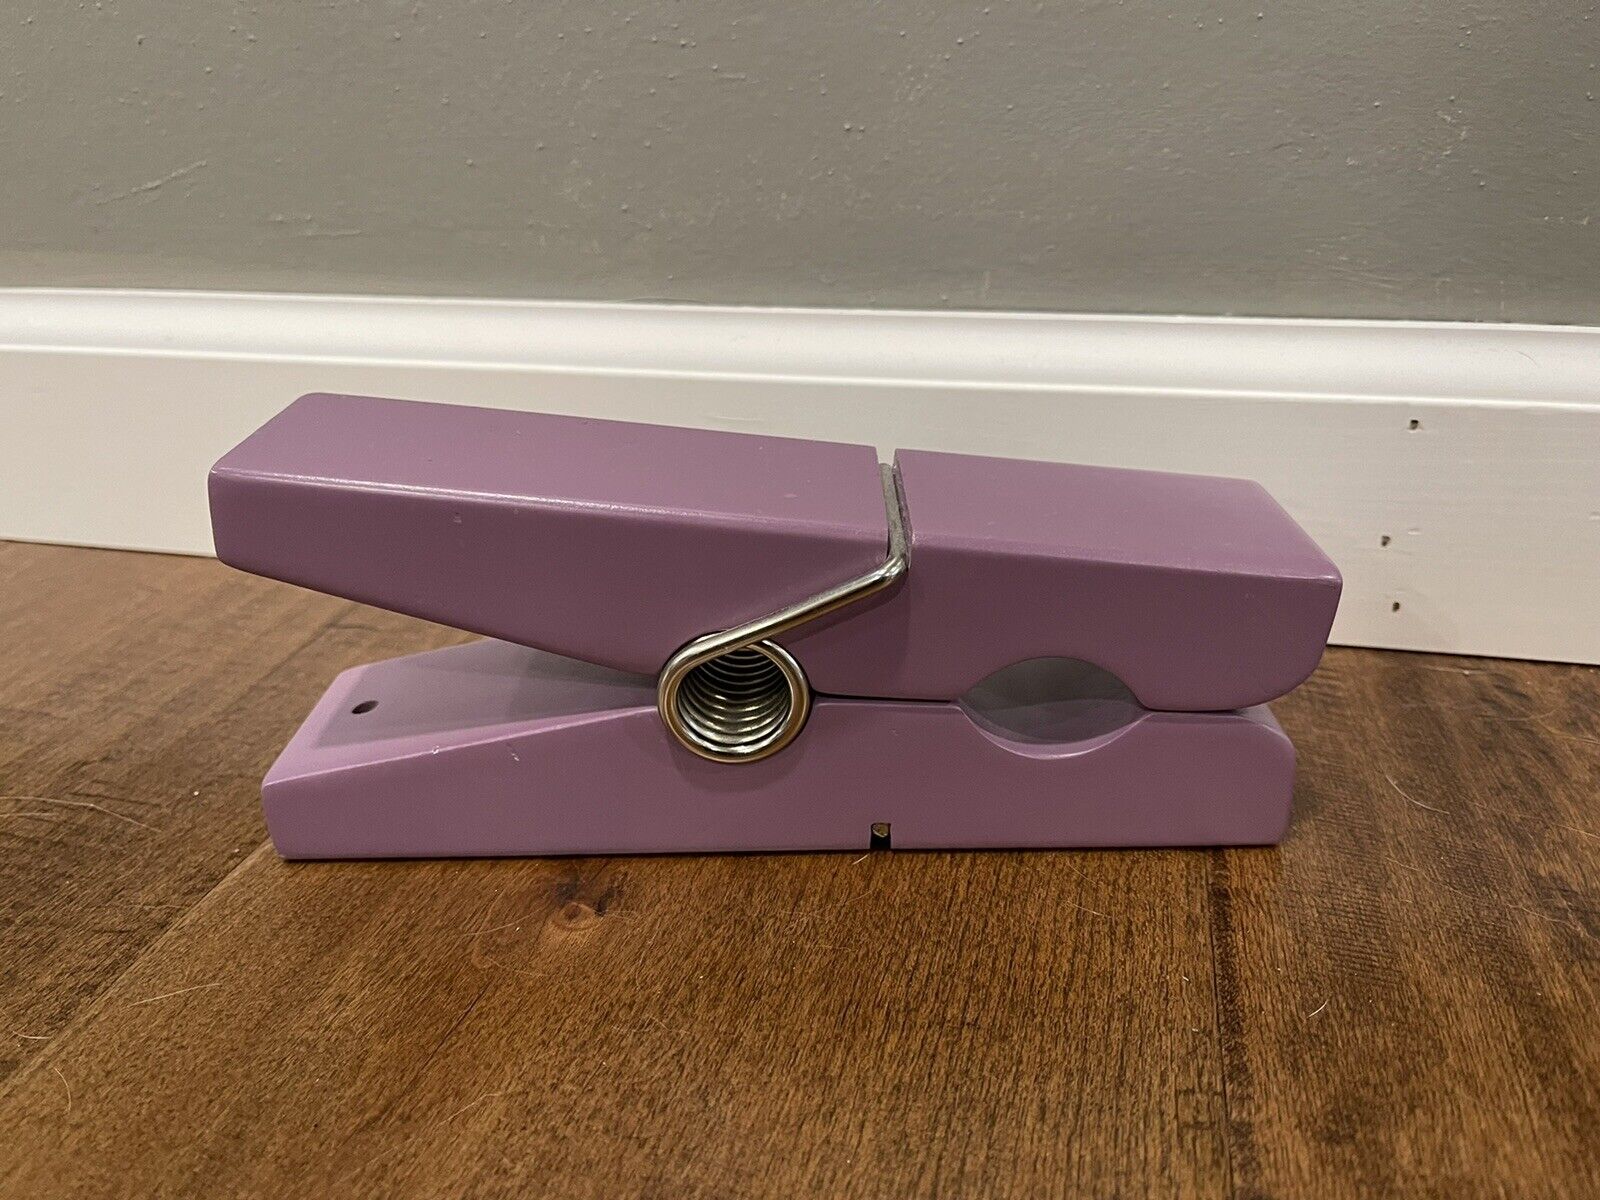 Larger Than Life Think Big Jumbo Oversized Giant Purple Wooden Clothespin 8\